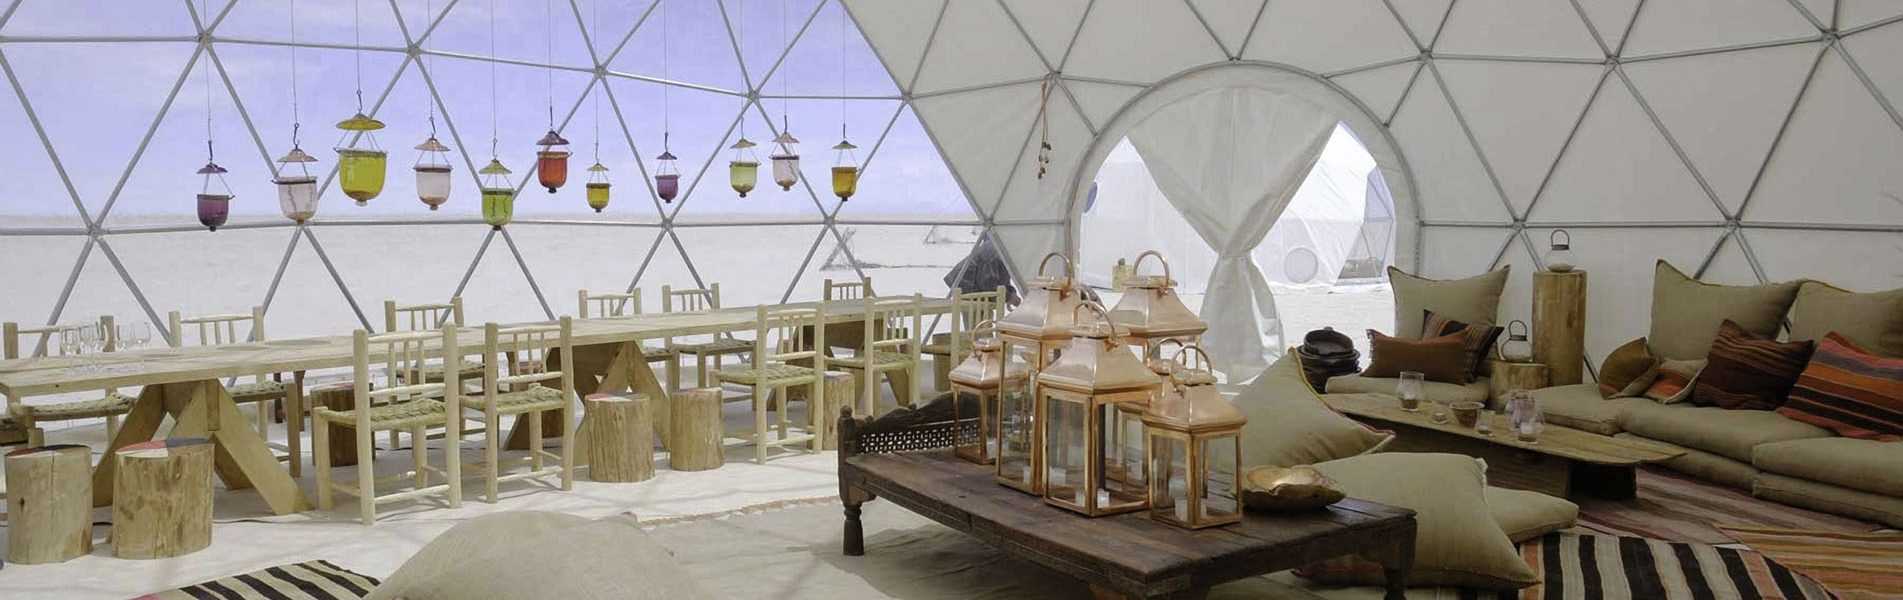 Glamping Dome - Pacific Domes